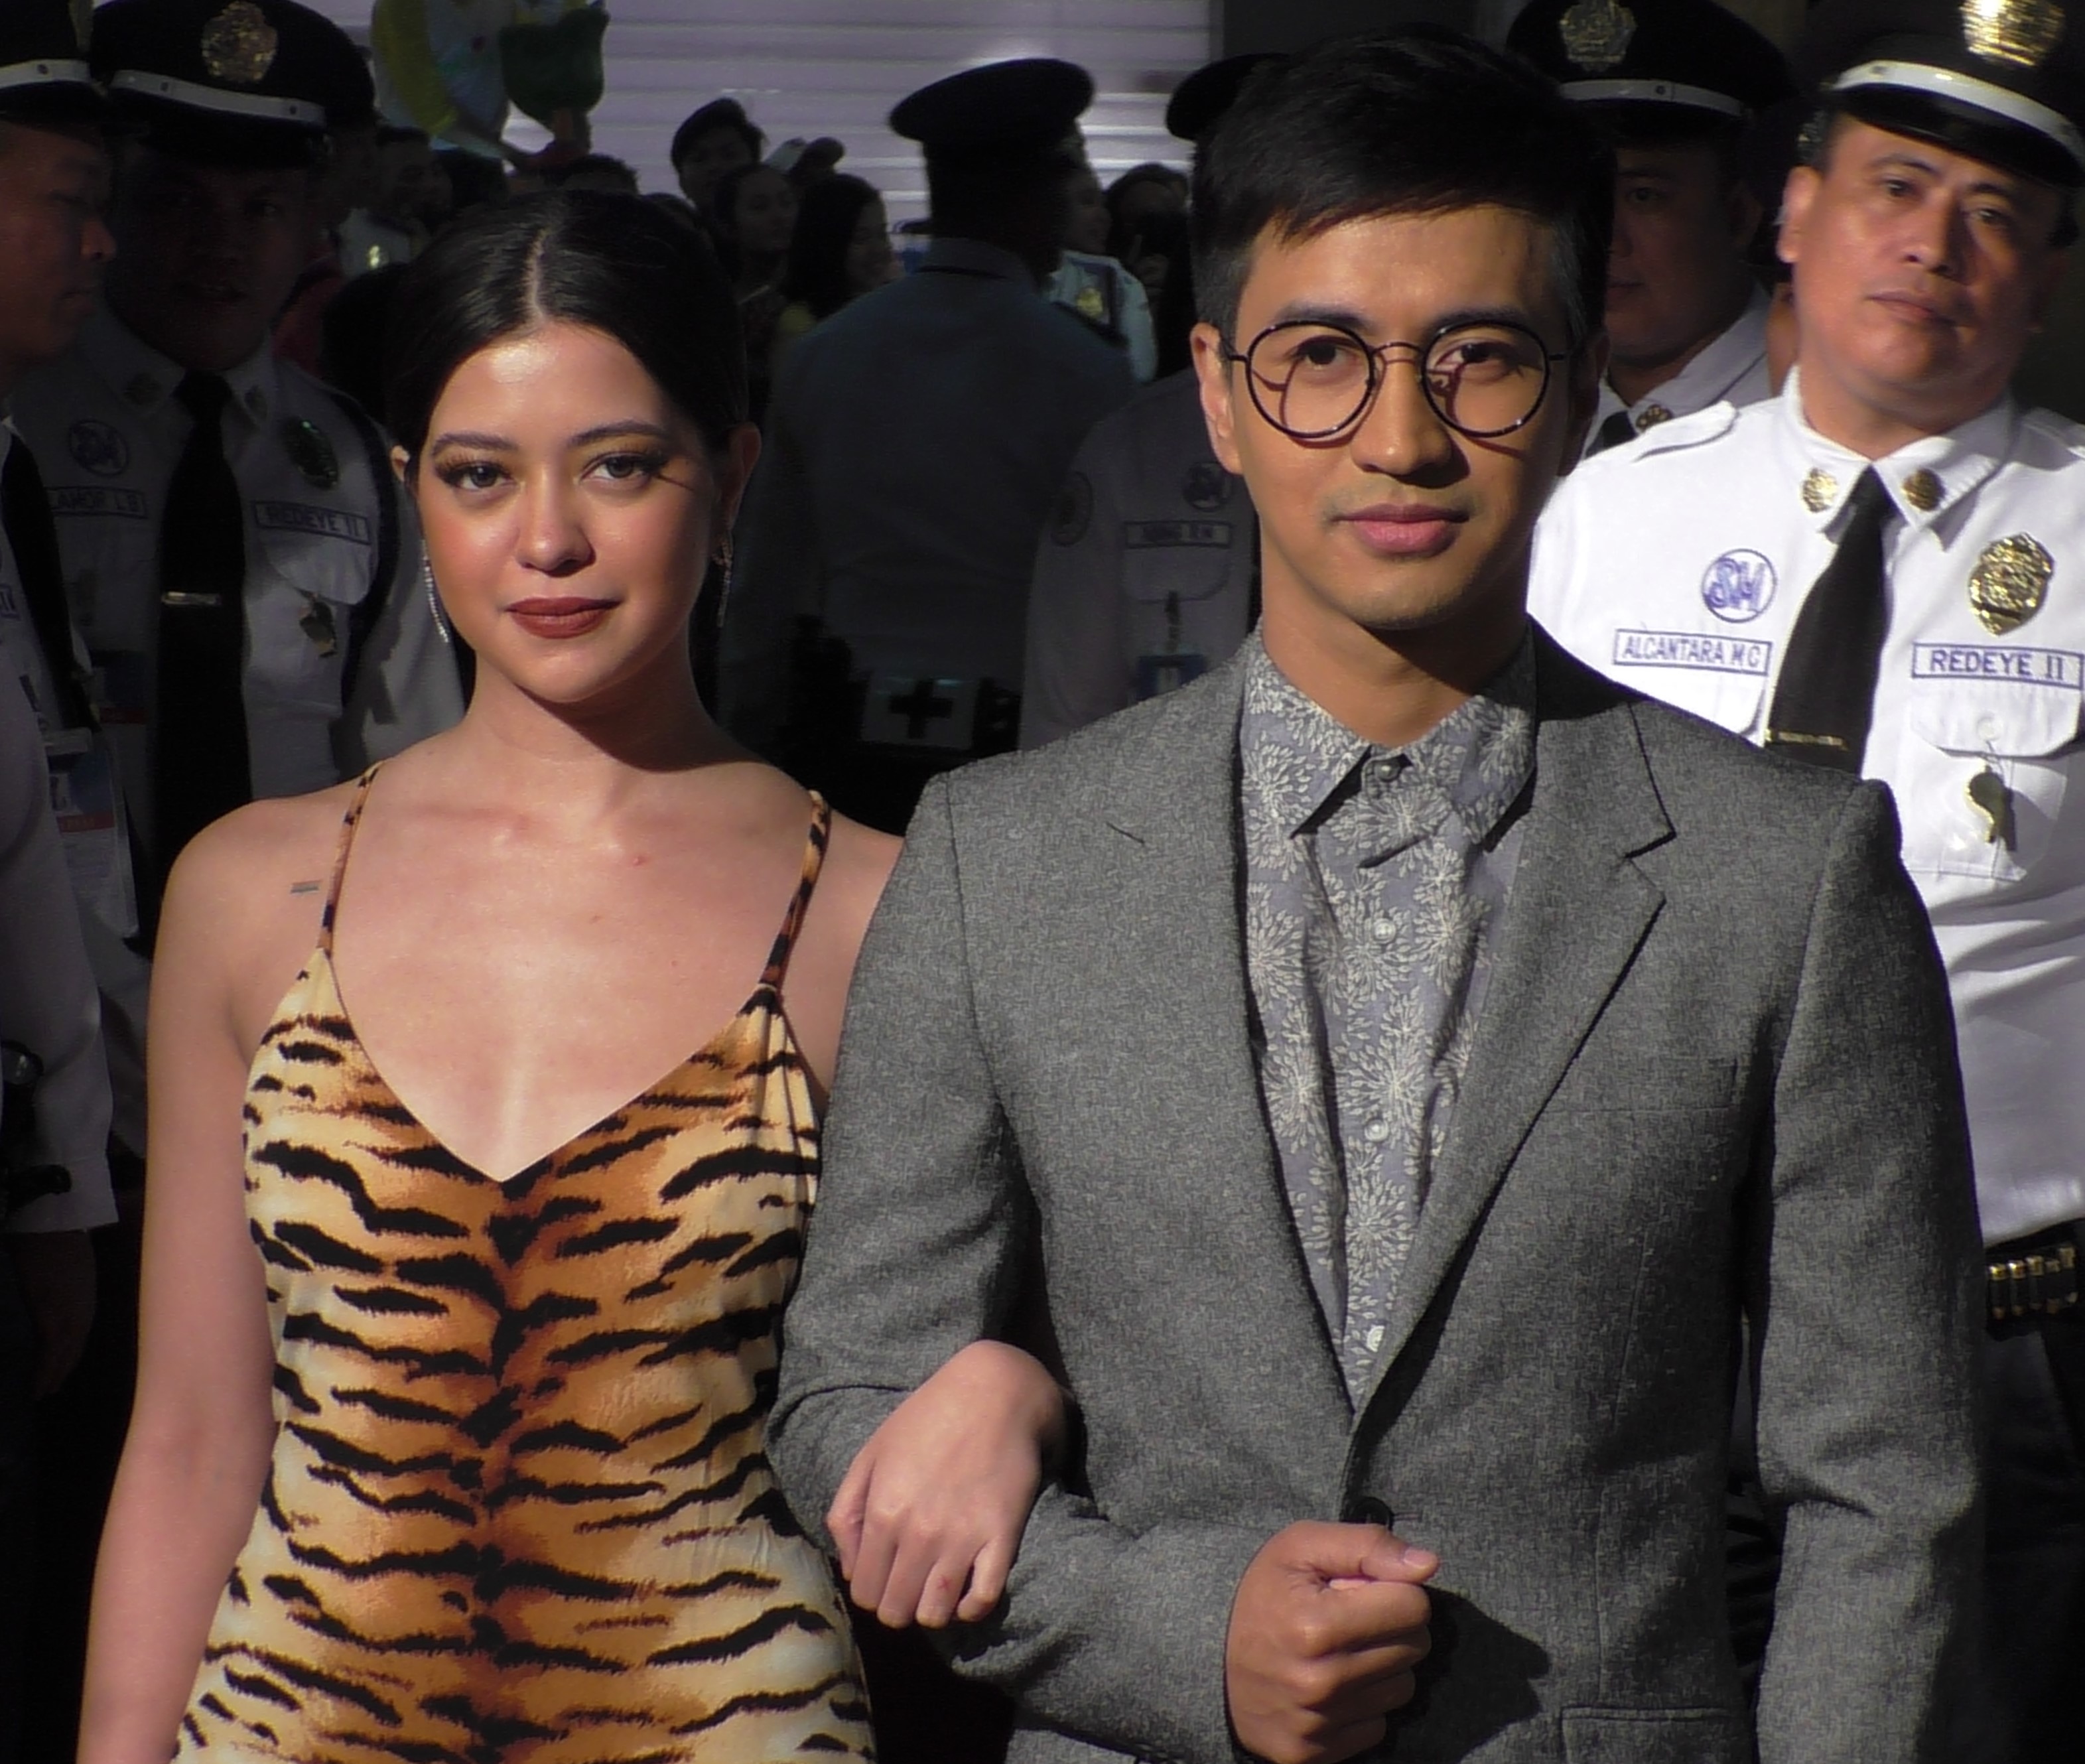 Movie review: 'Cuddle Weather' - plus my exclusive photos of Sue Ramirez  and RK Bagatsing at the red carpet premiere | Inquirer Entertainment